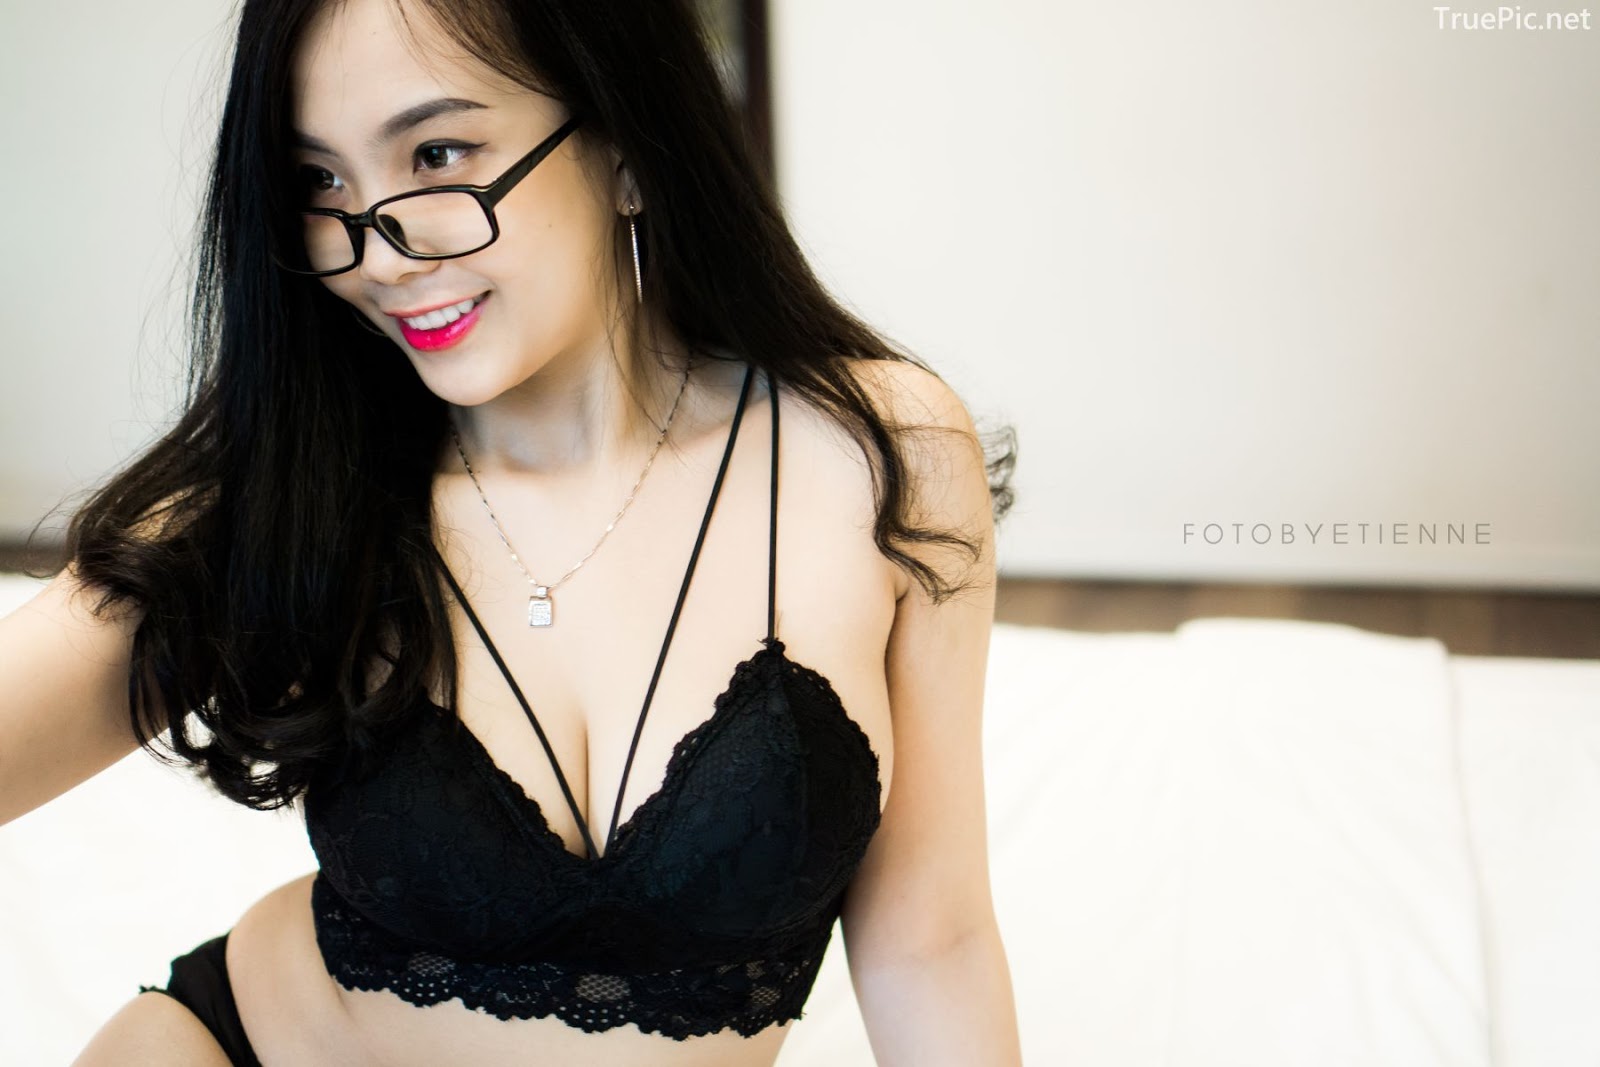 Super hot photos of Vietnamese beauties with lingerie and bikini - Photo by Le Blanc Studio - Part 4 - Picture 68